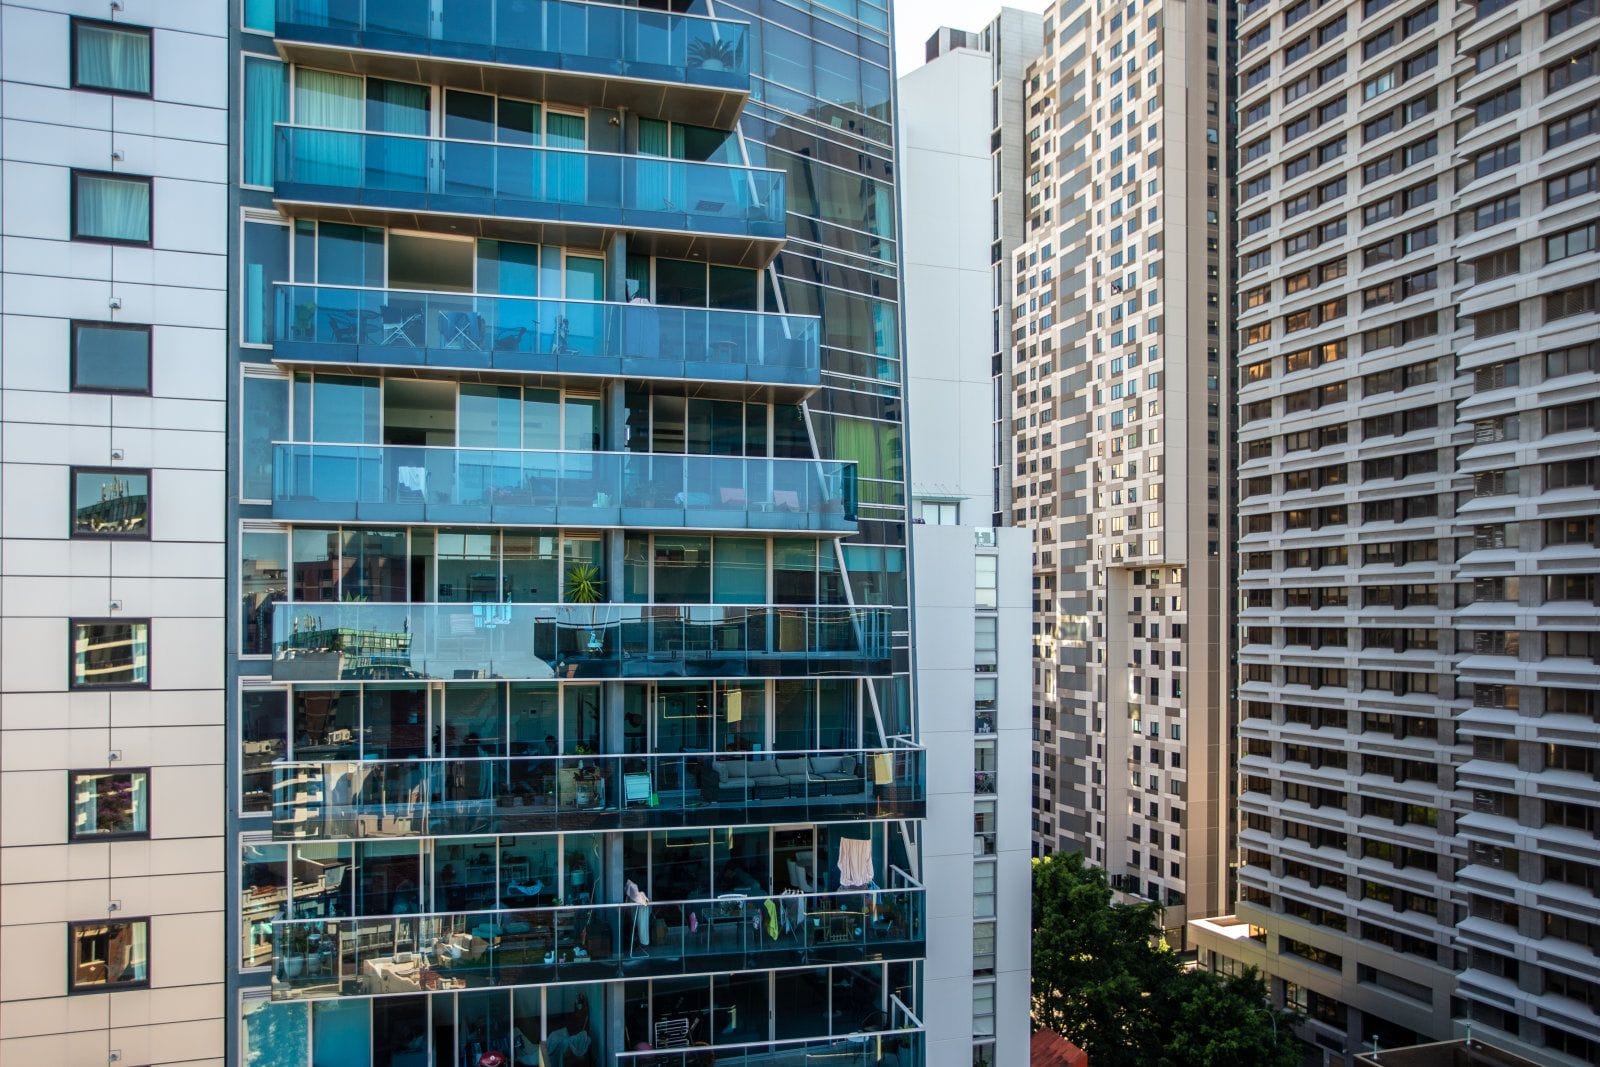 Sydney aims to pack more people in through build-to-rent incentives for developers